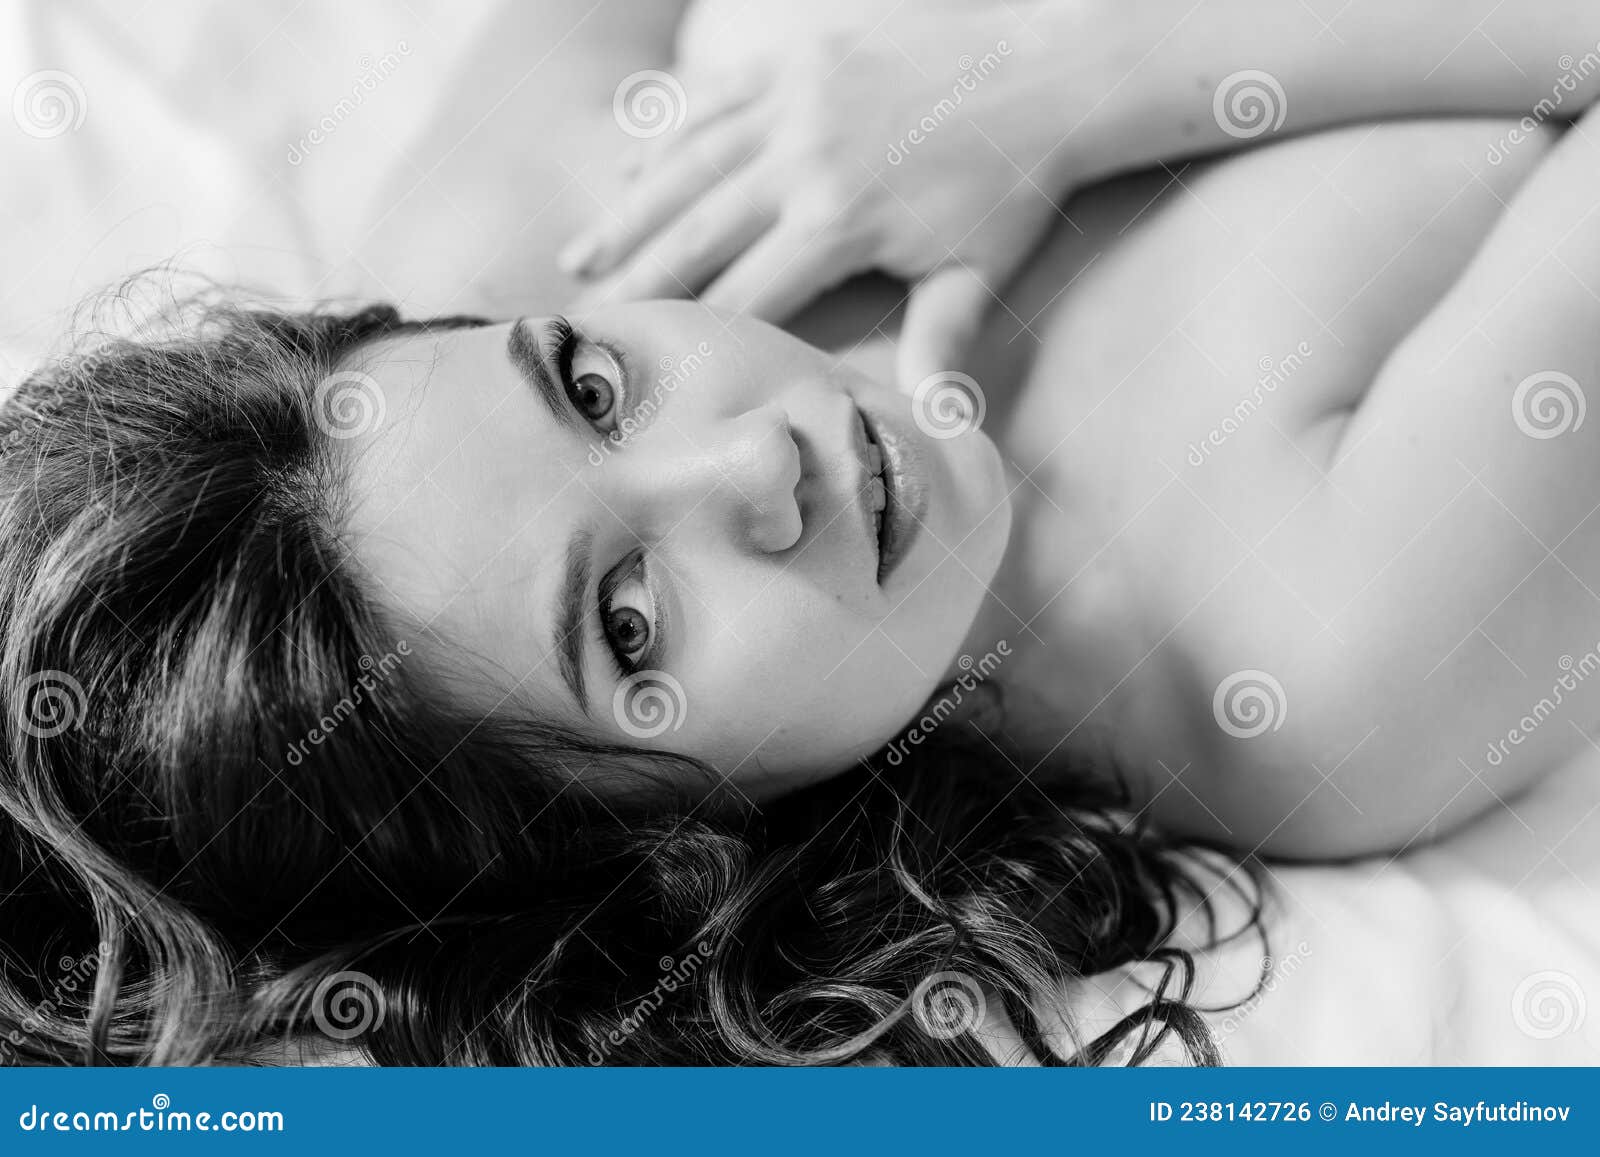 Face of a Naked Pregnant Woman in image